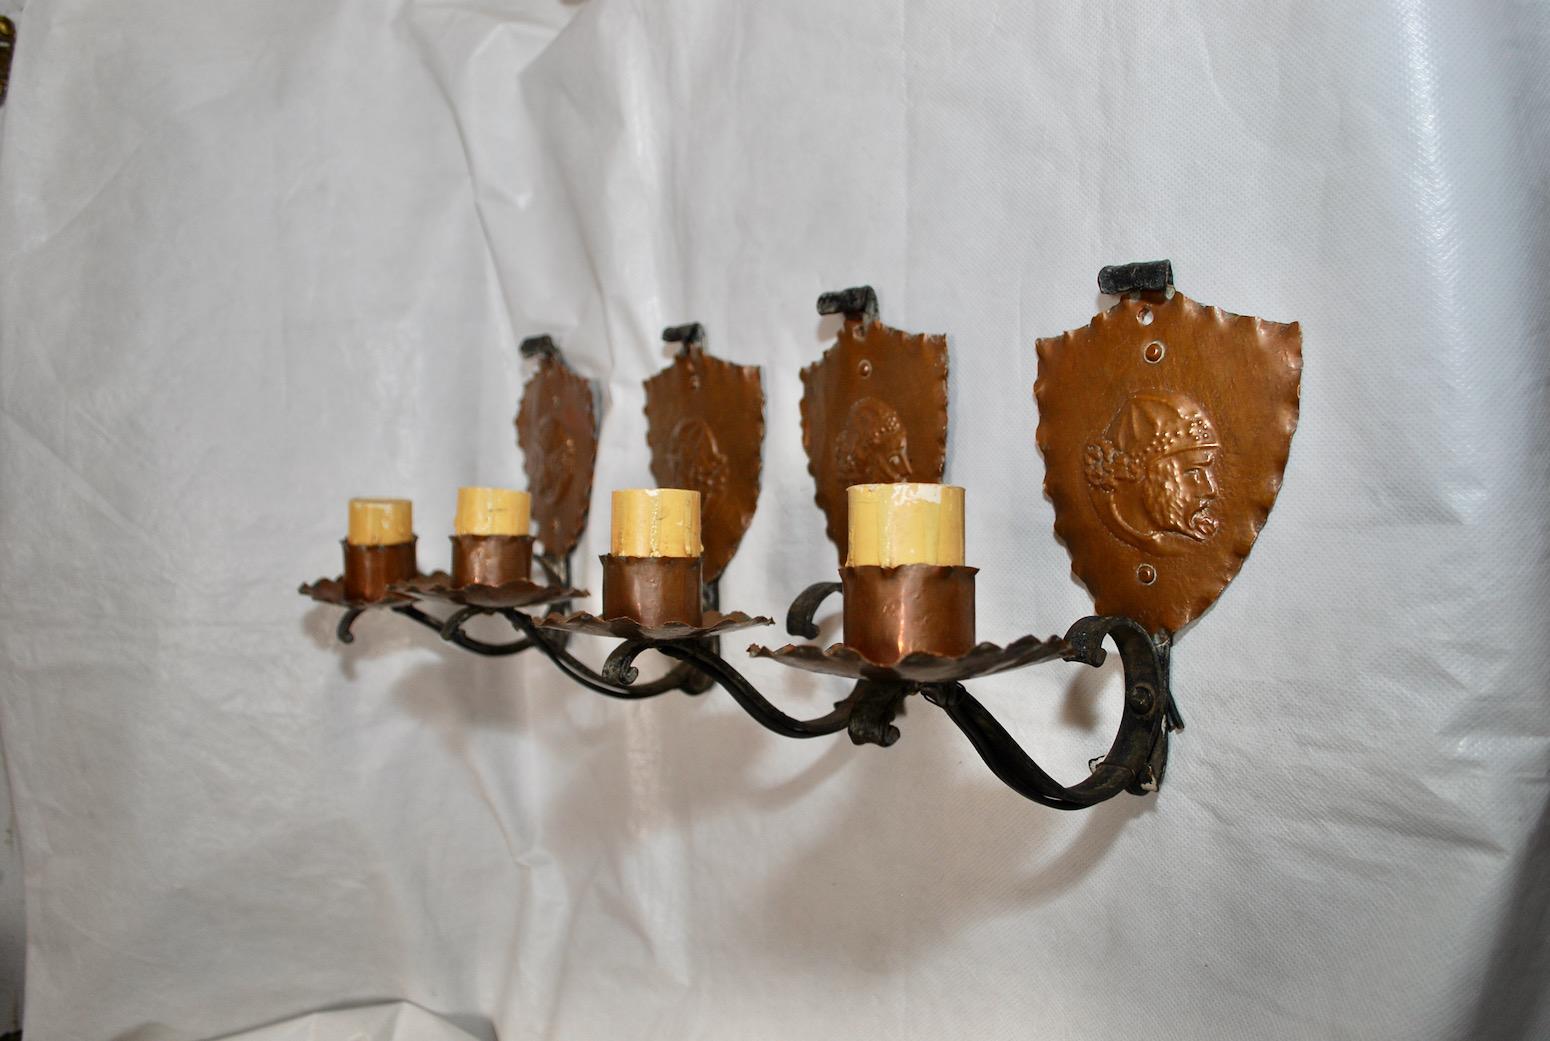 A very nice and rare set of four French 1920's copper and wrought iron sconces, the faces were hands carved, the patina is so much nicer in person.